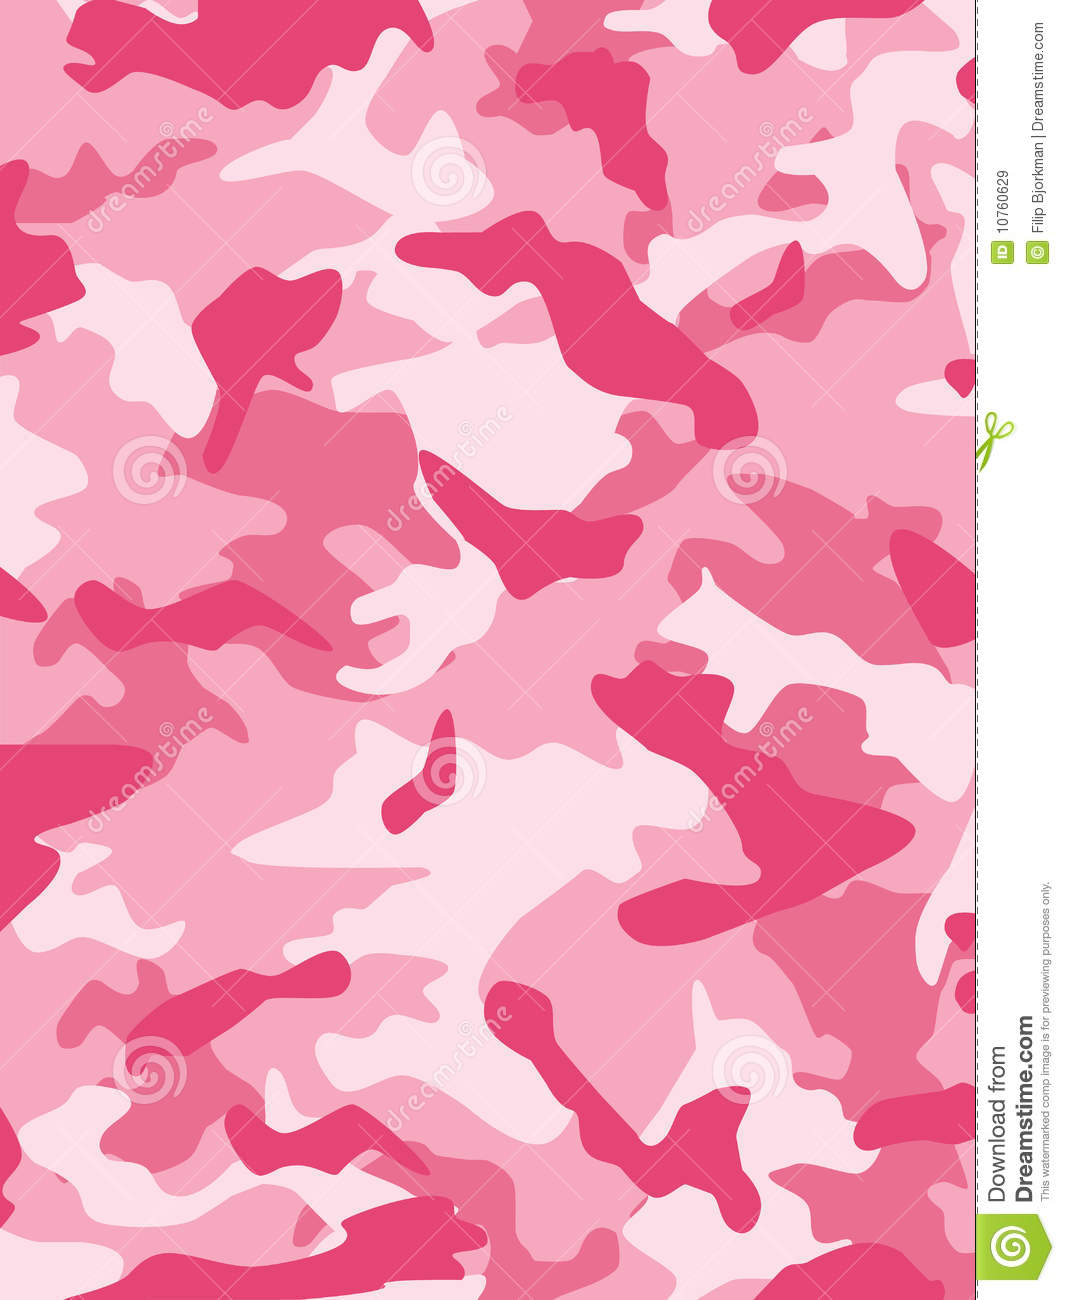 pink army camouflage pattern